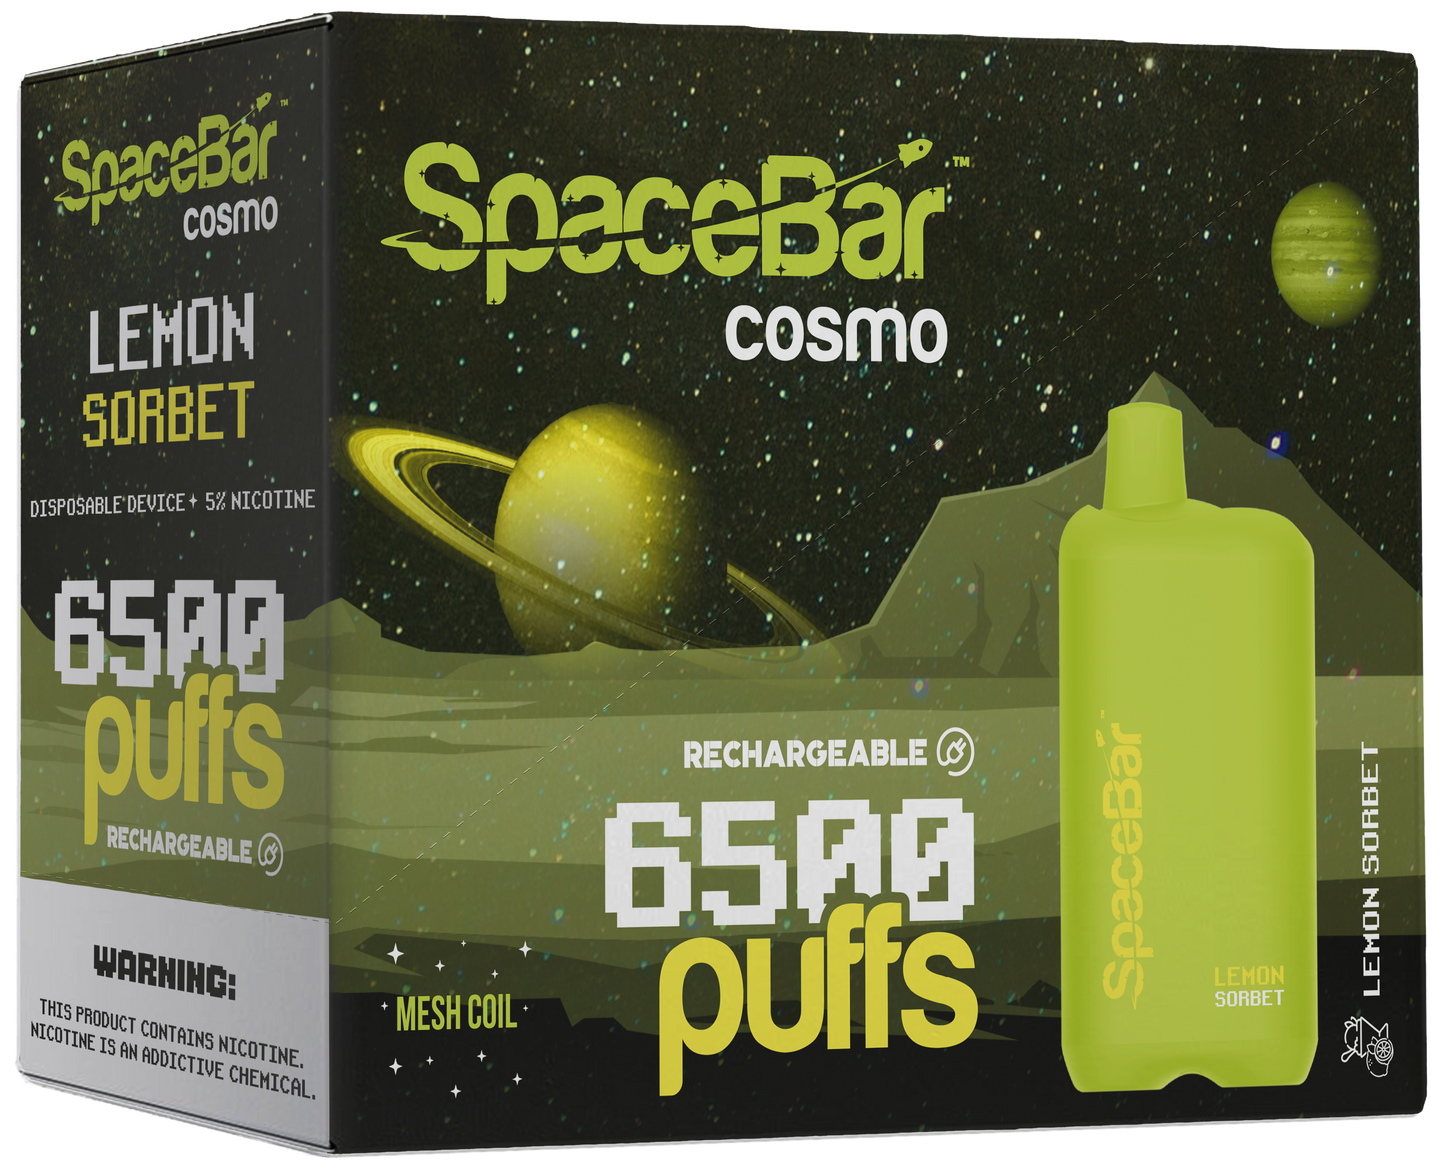 SPACEBAR 6500 Puffs Rechargeable Disposables – 5 Pack